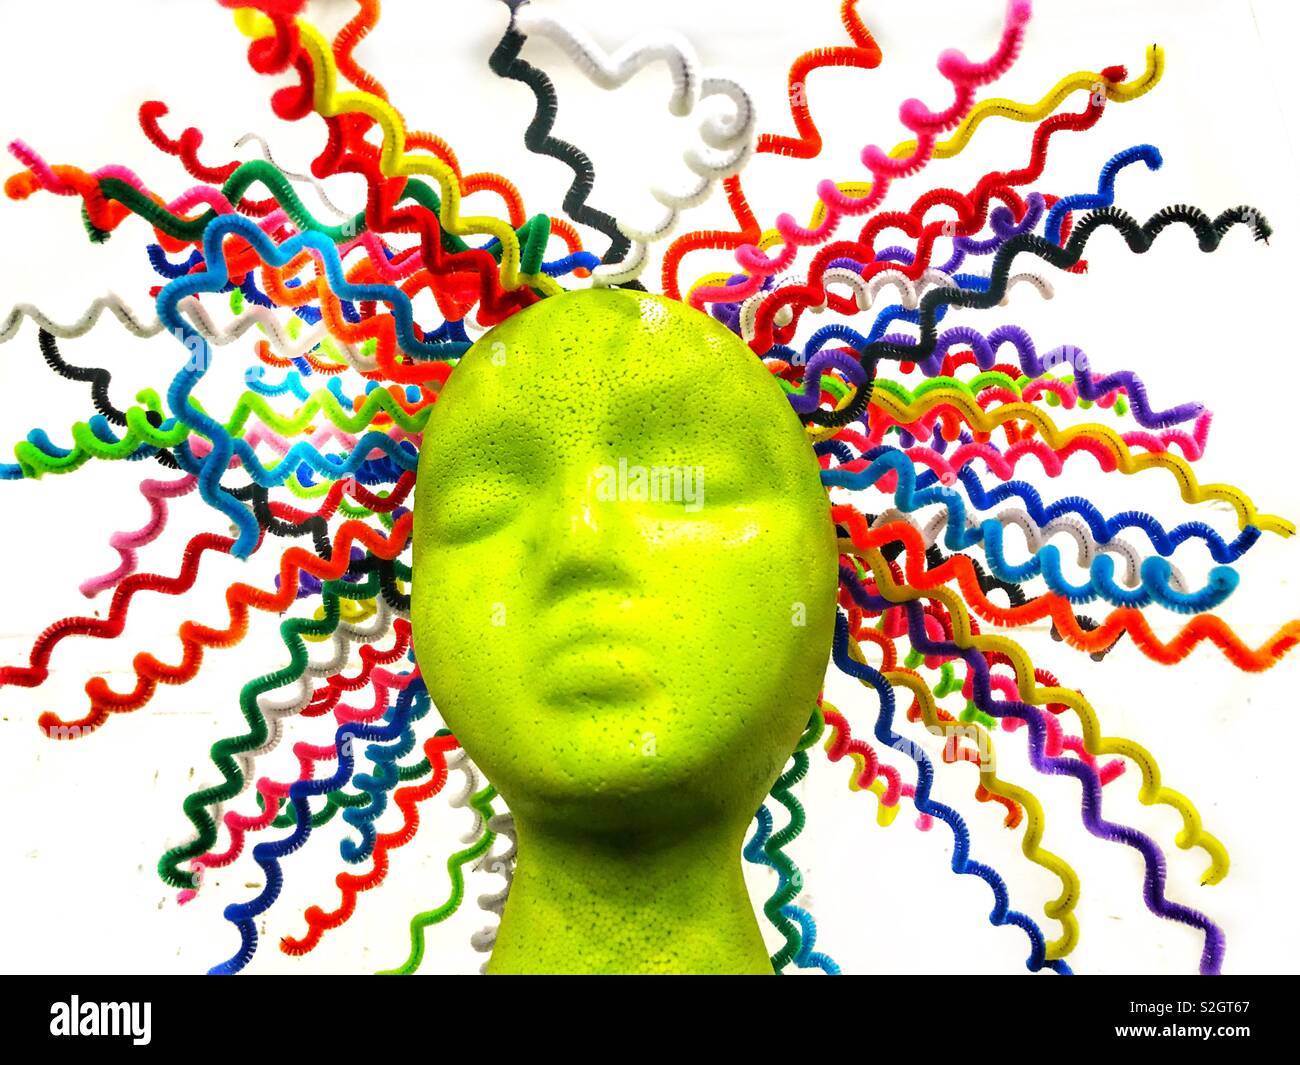 A lime green mannequin head with colorful sprains of hair protruding in all directions on a white background Stock Photo